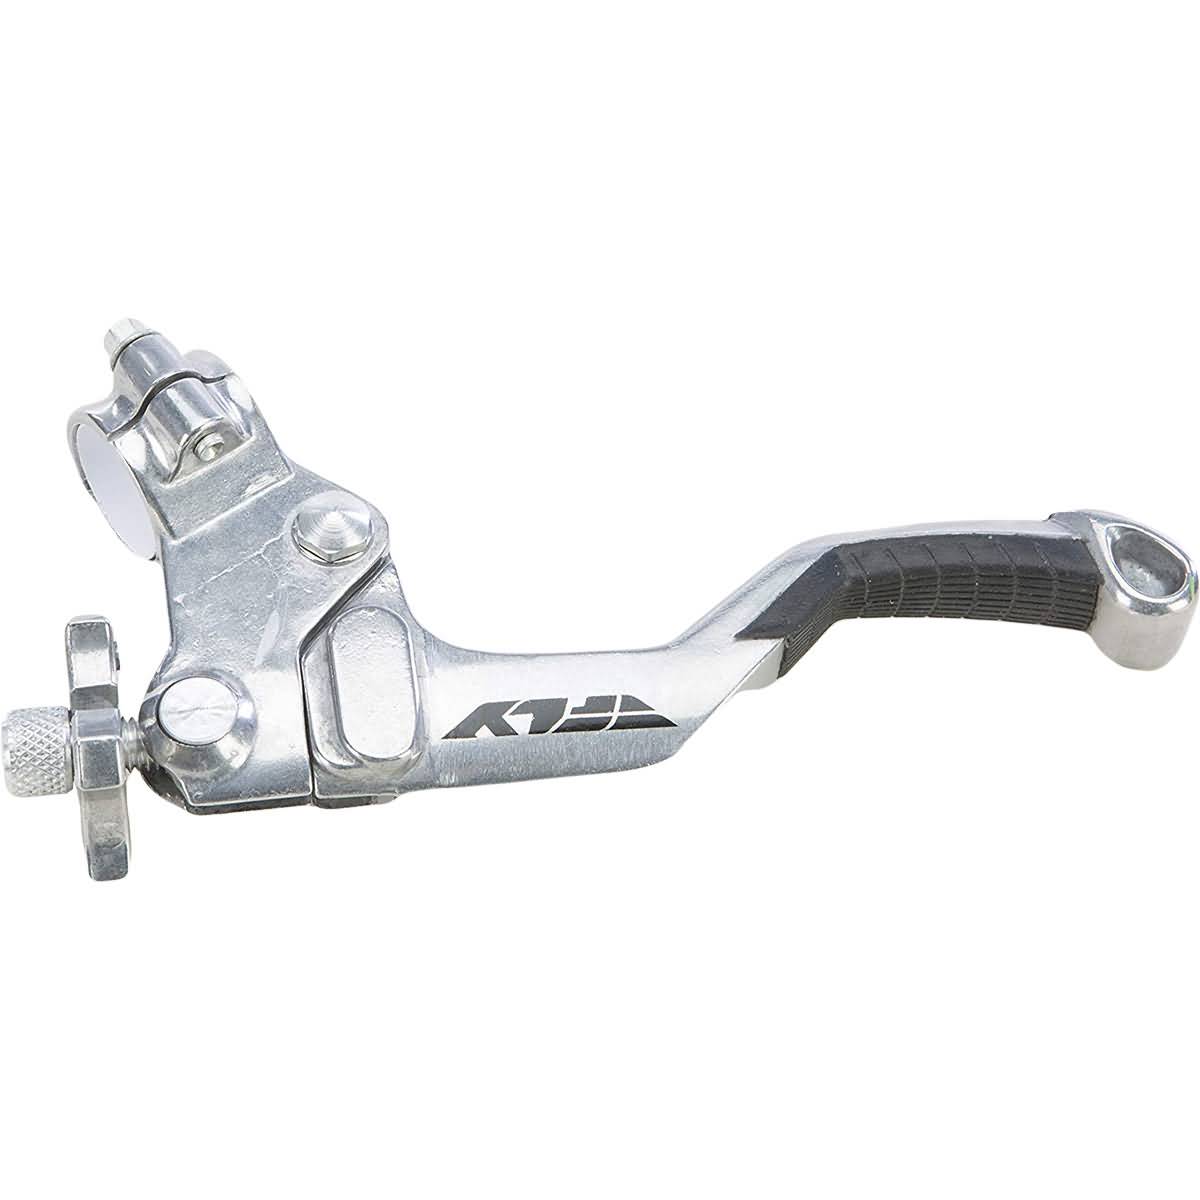 Fly Racing EZ-3 Shorty Clutch Lever Accessories-567